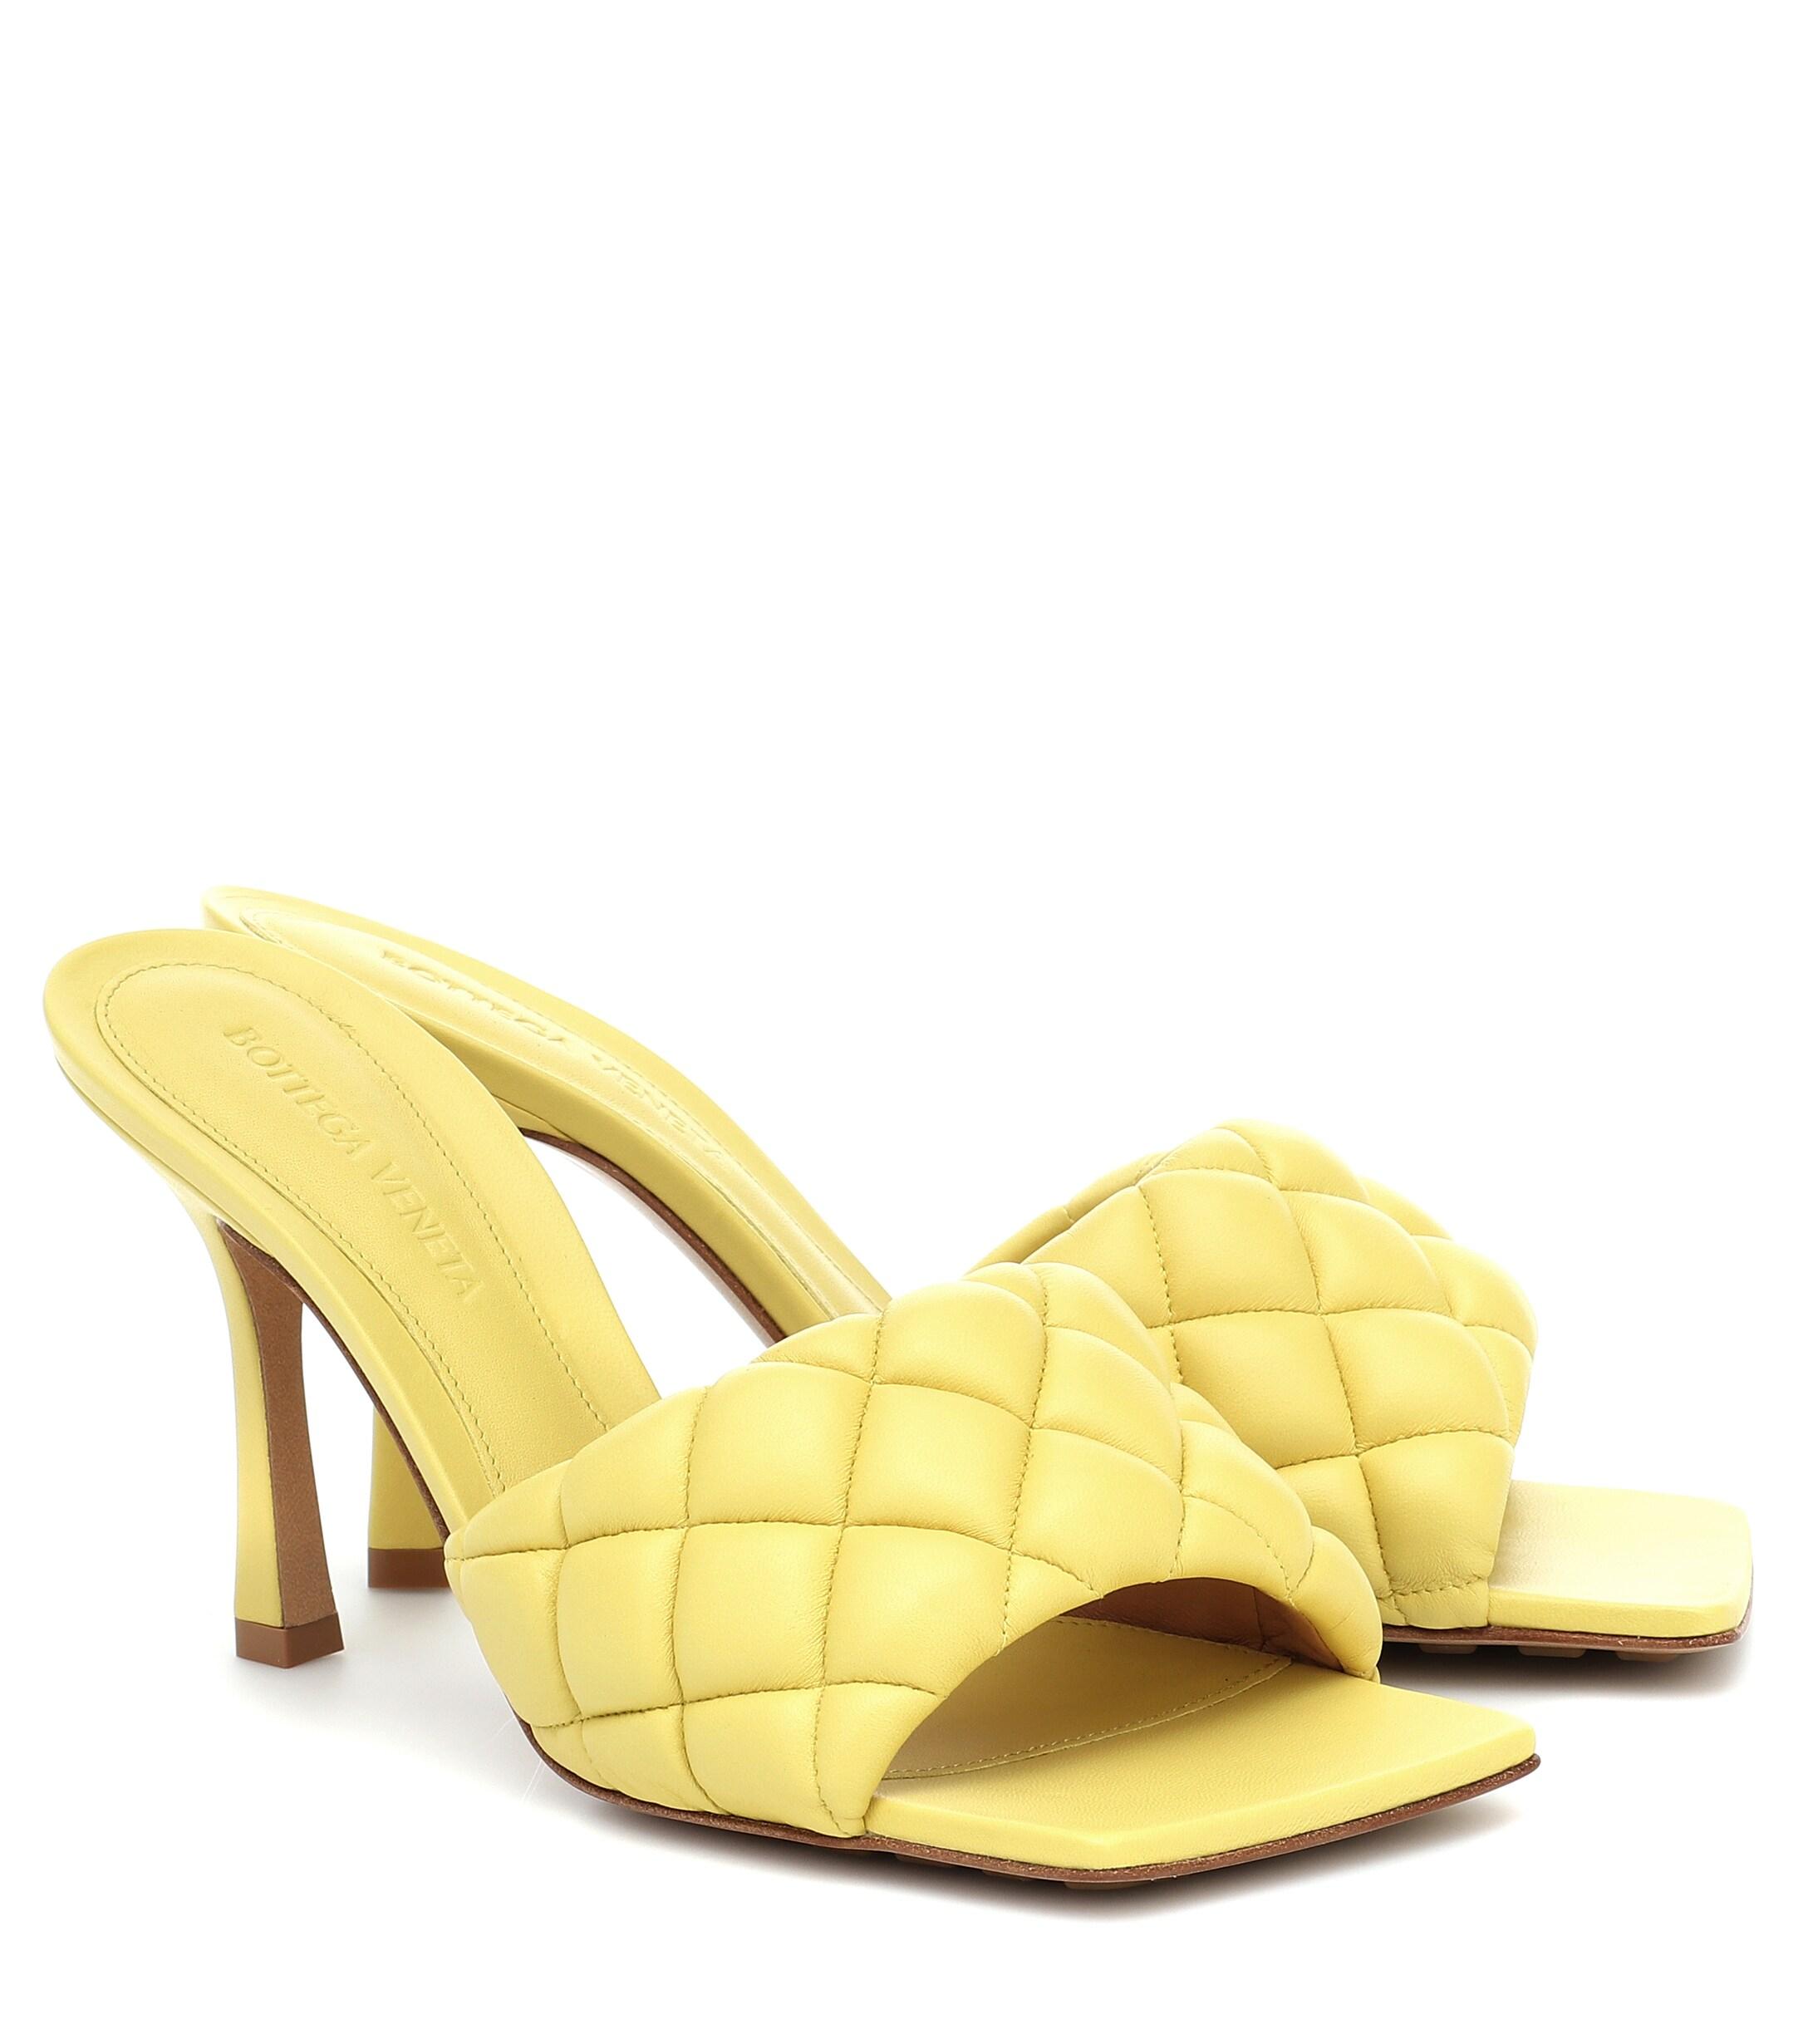 Bottega Veneta Padded Quilted-leather Heeled Mules in Yellow 